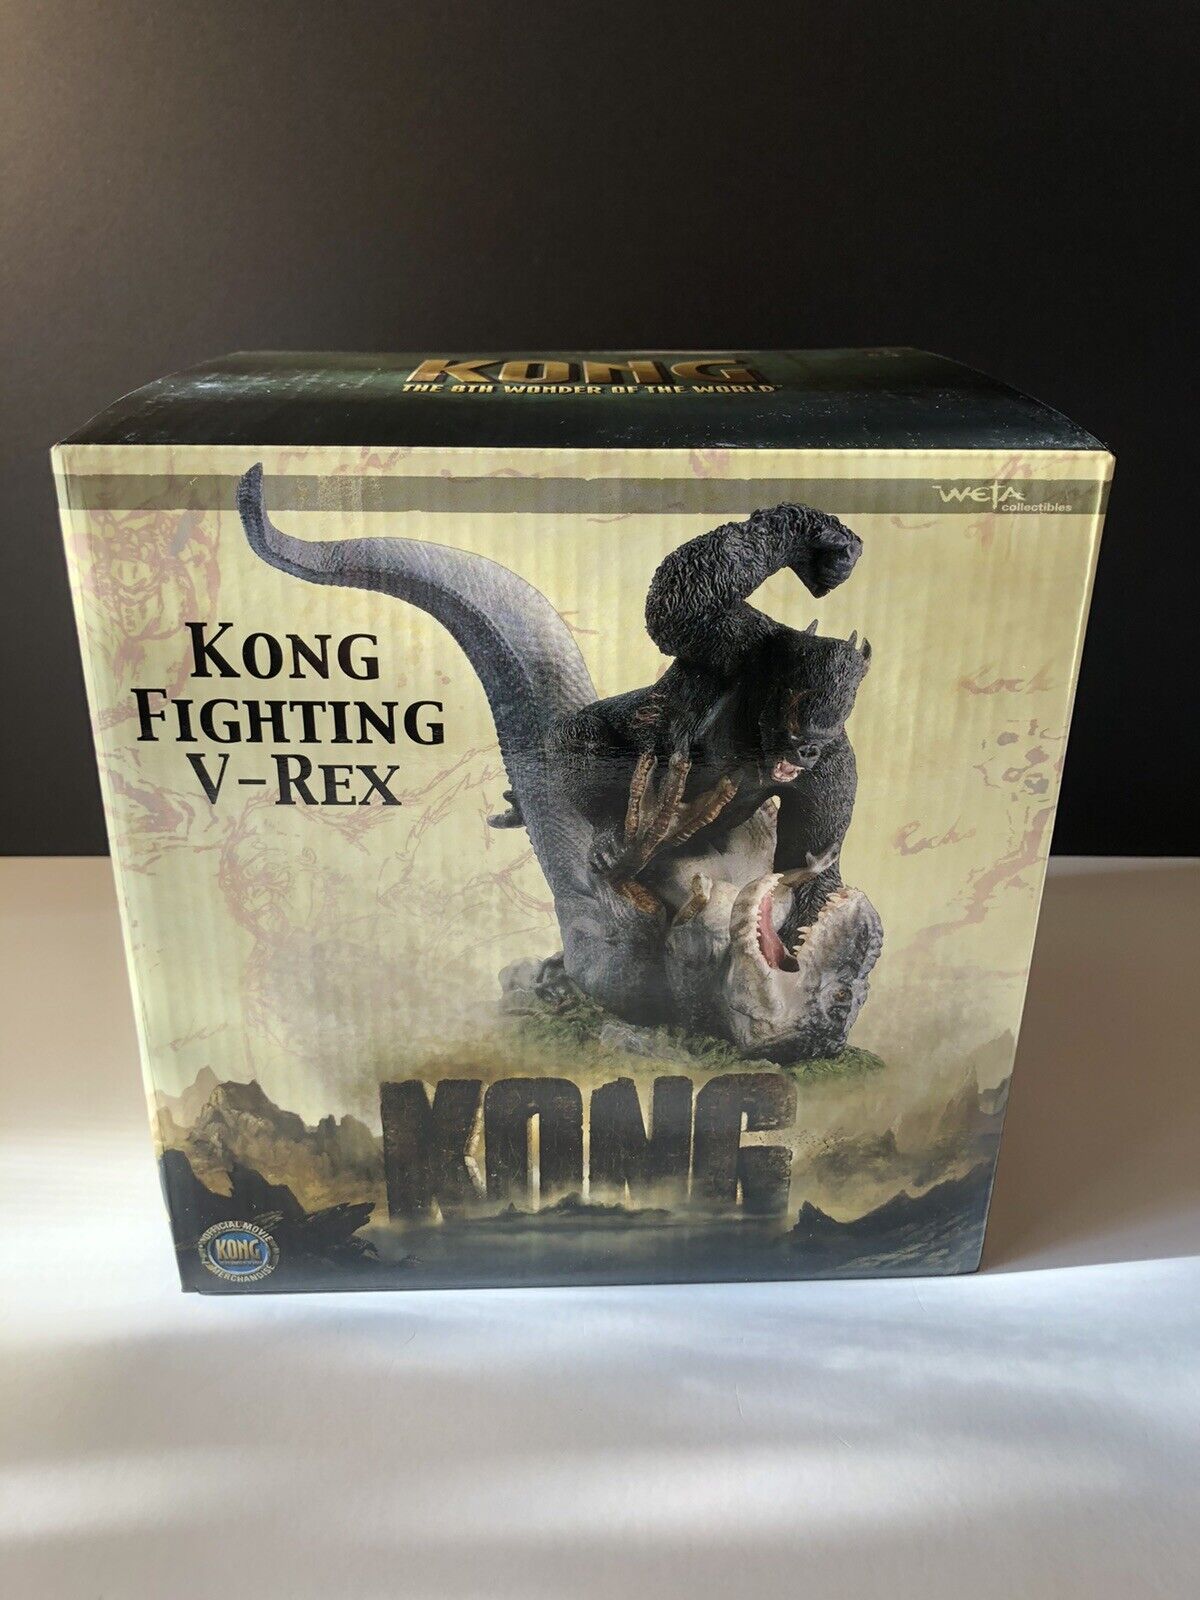 KING KONG FIGHTING V-REX MOVIE STATUE - WETA NZ COLLECTIBLES - LIMITED EDITION